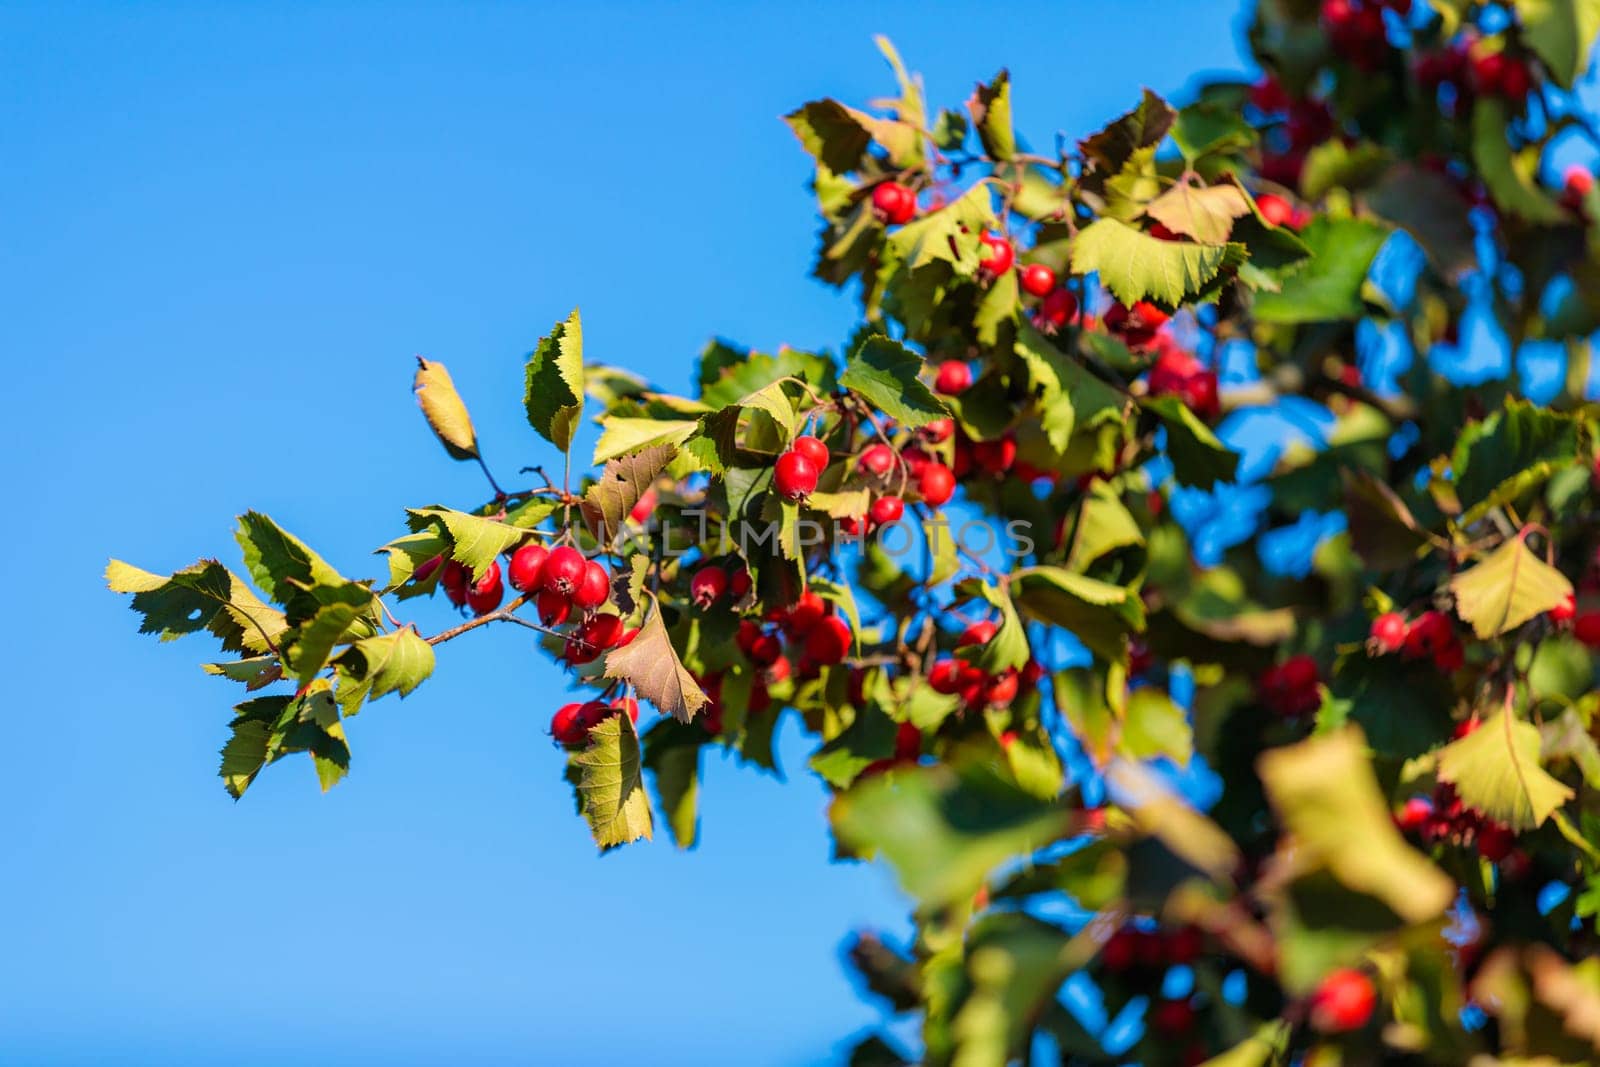 Bright red rosehips decorate nature with autumn colors by Yurich32